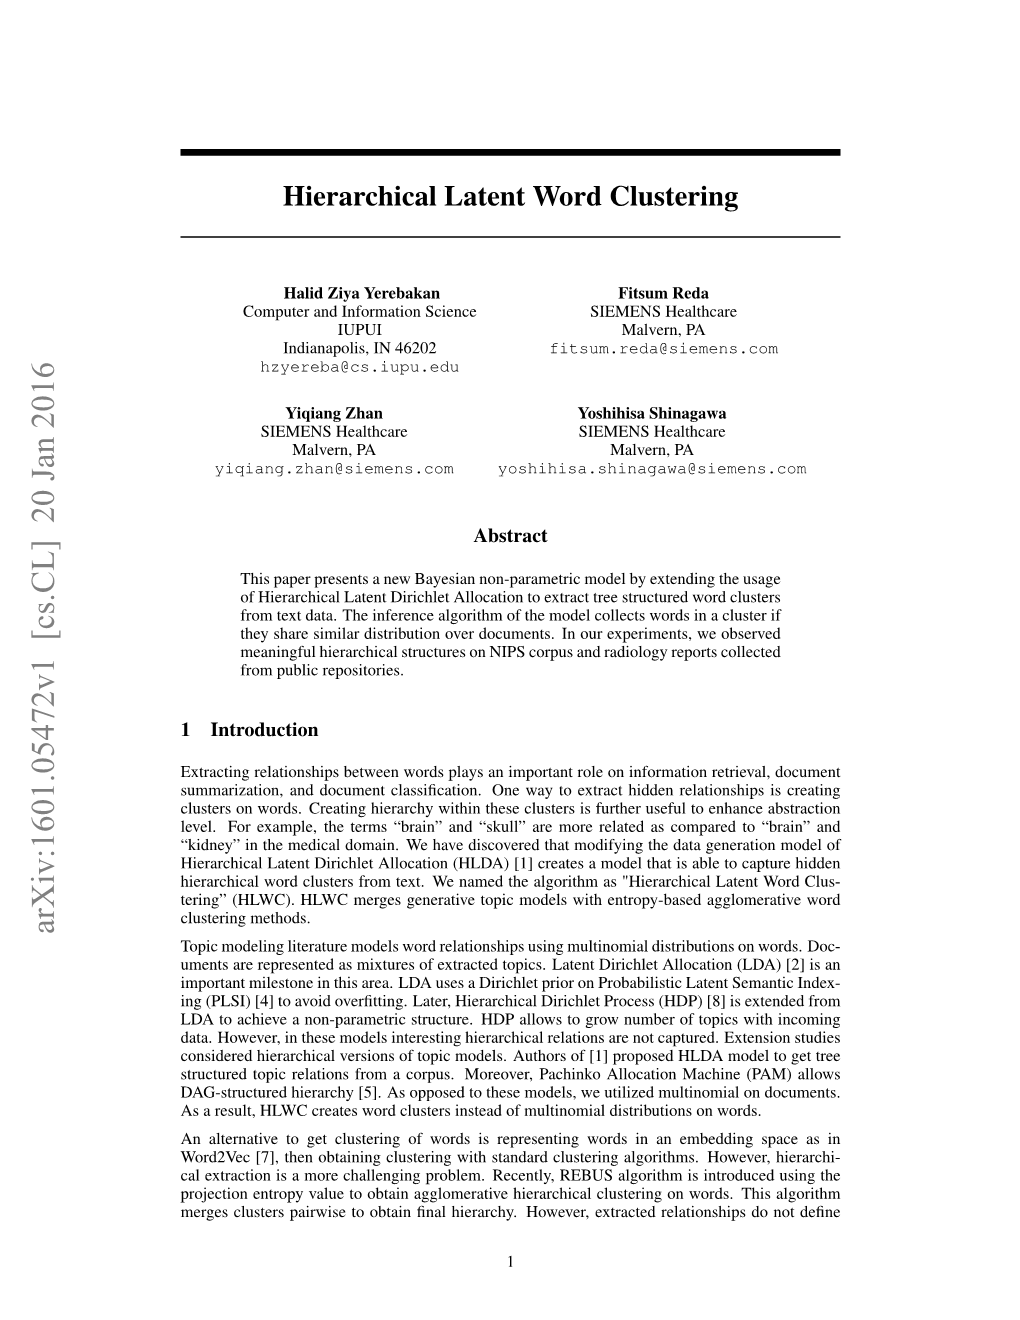 Hierarchical Latent Word Clustering